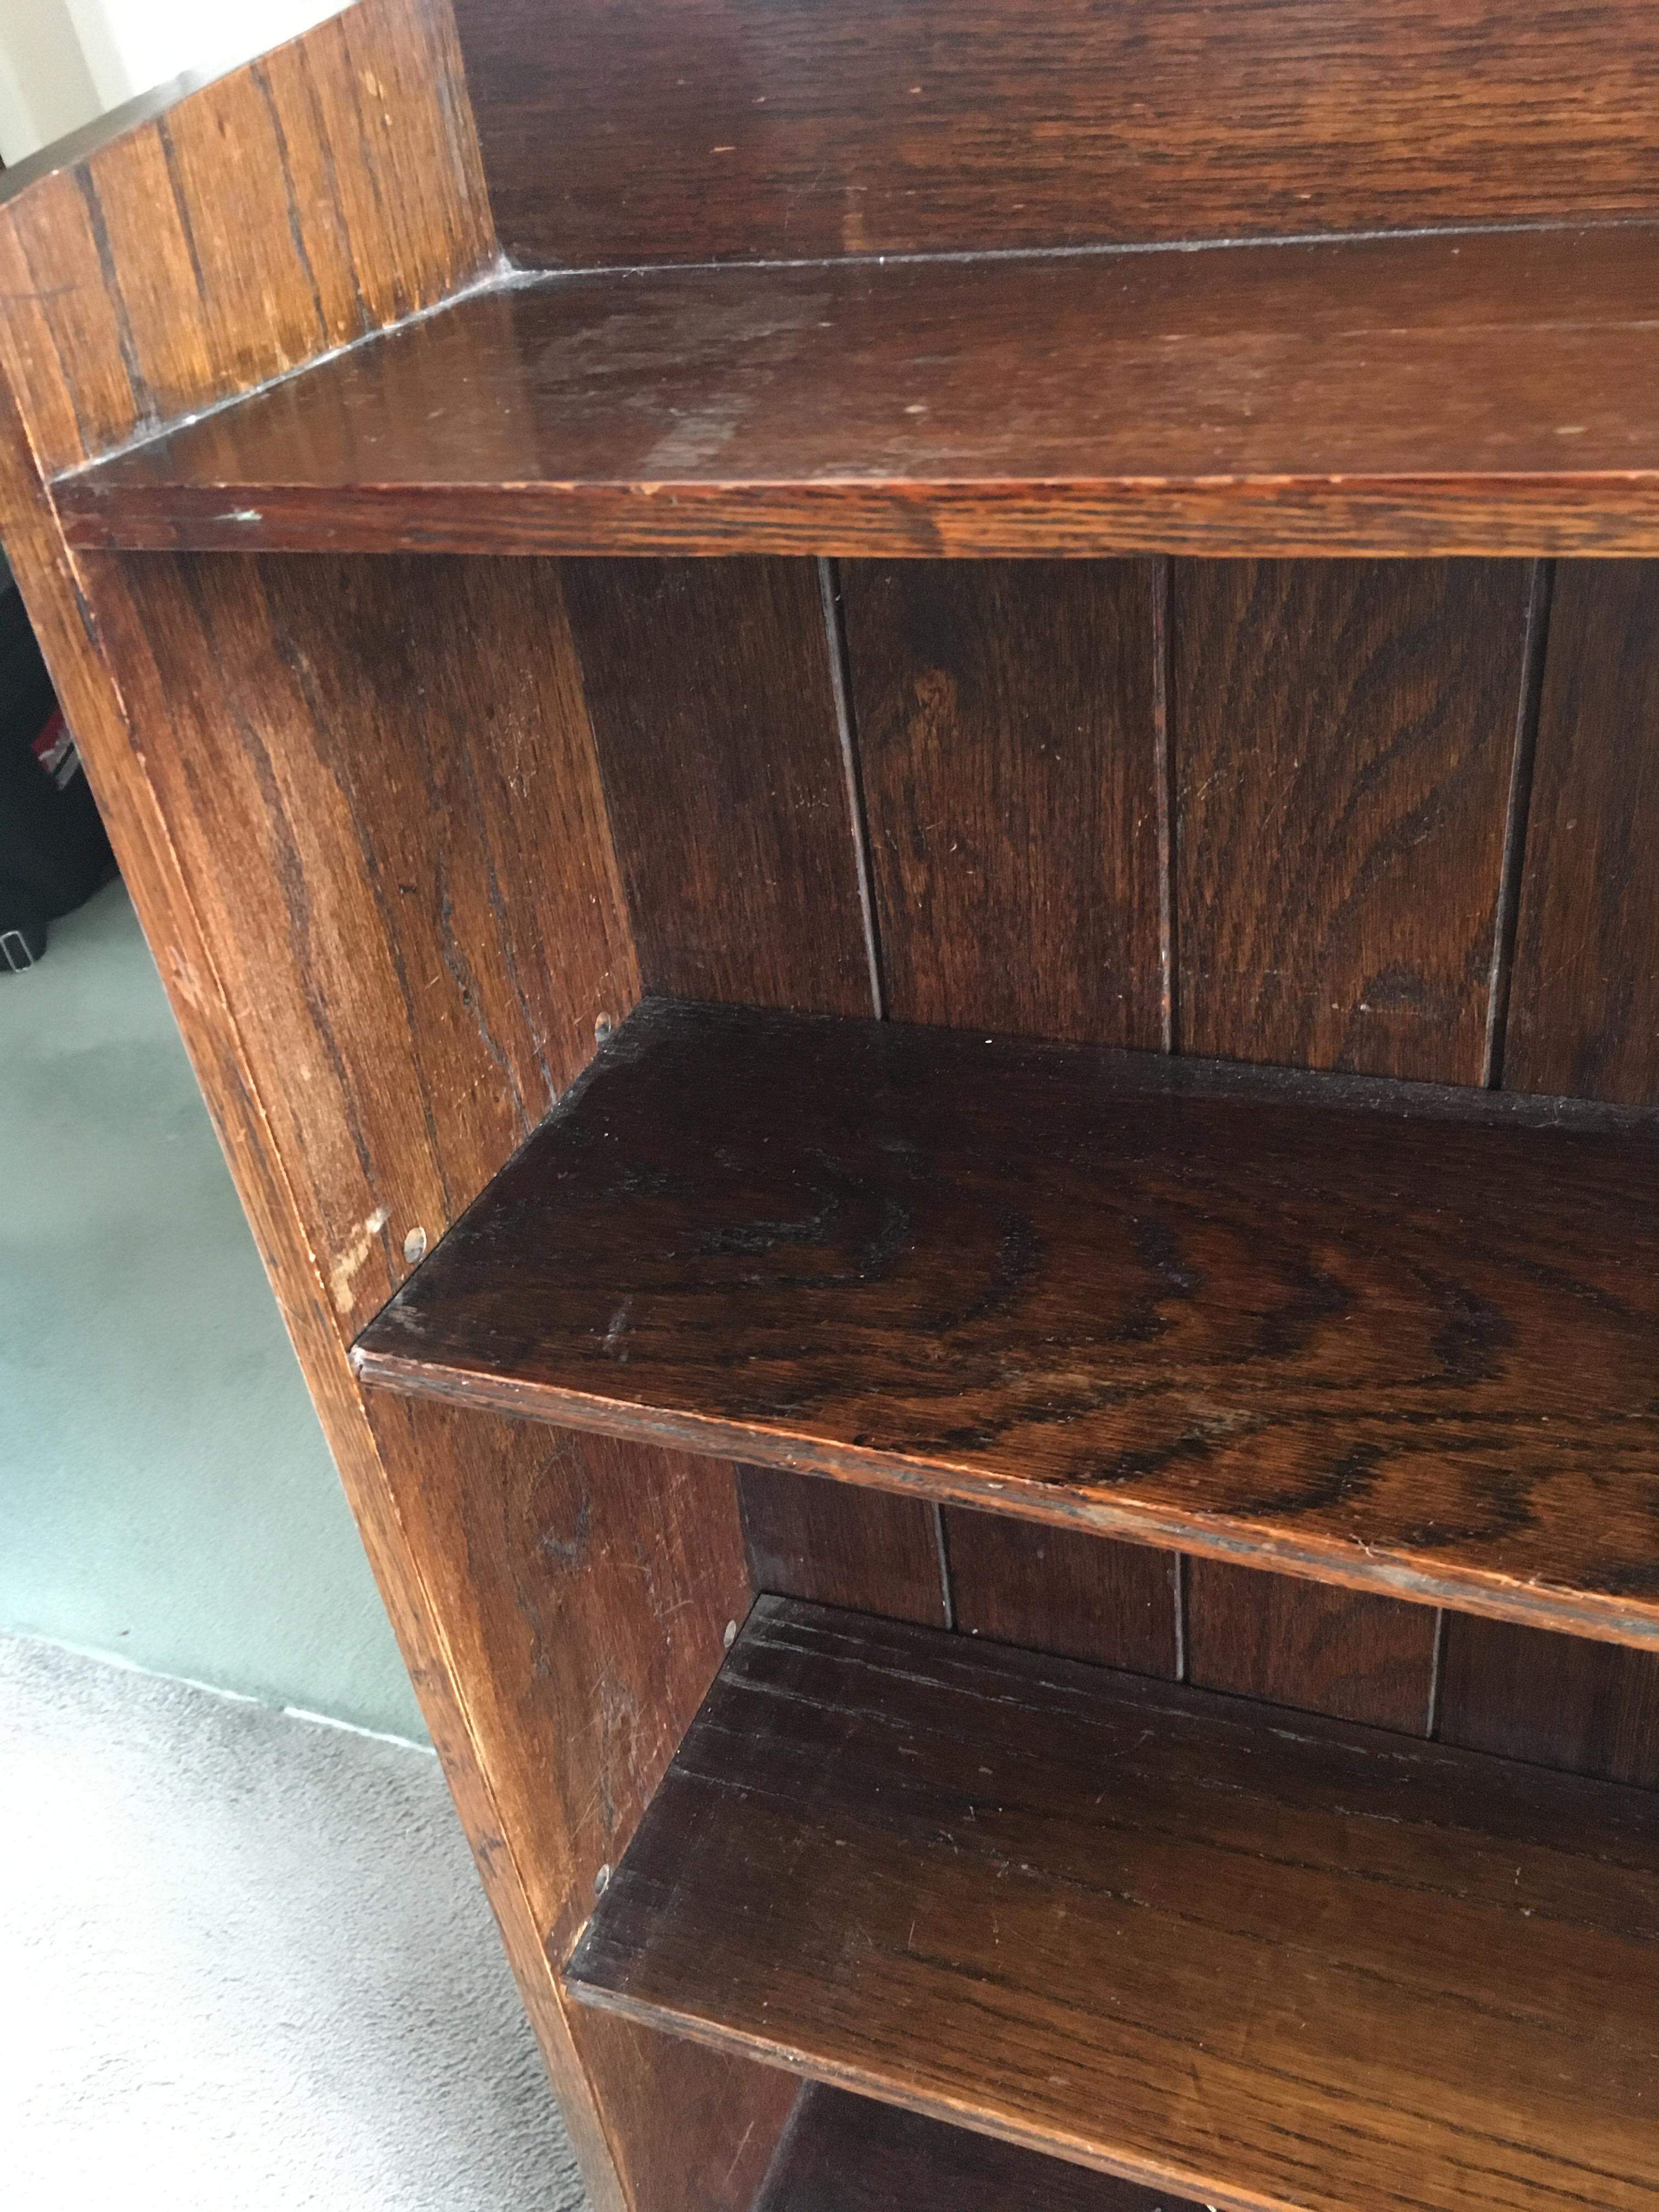 Pair of 1920's Oak Open Bookcases with Adjustable Shelves